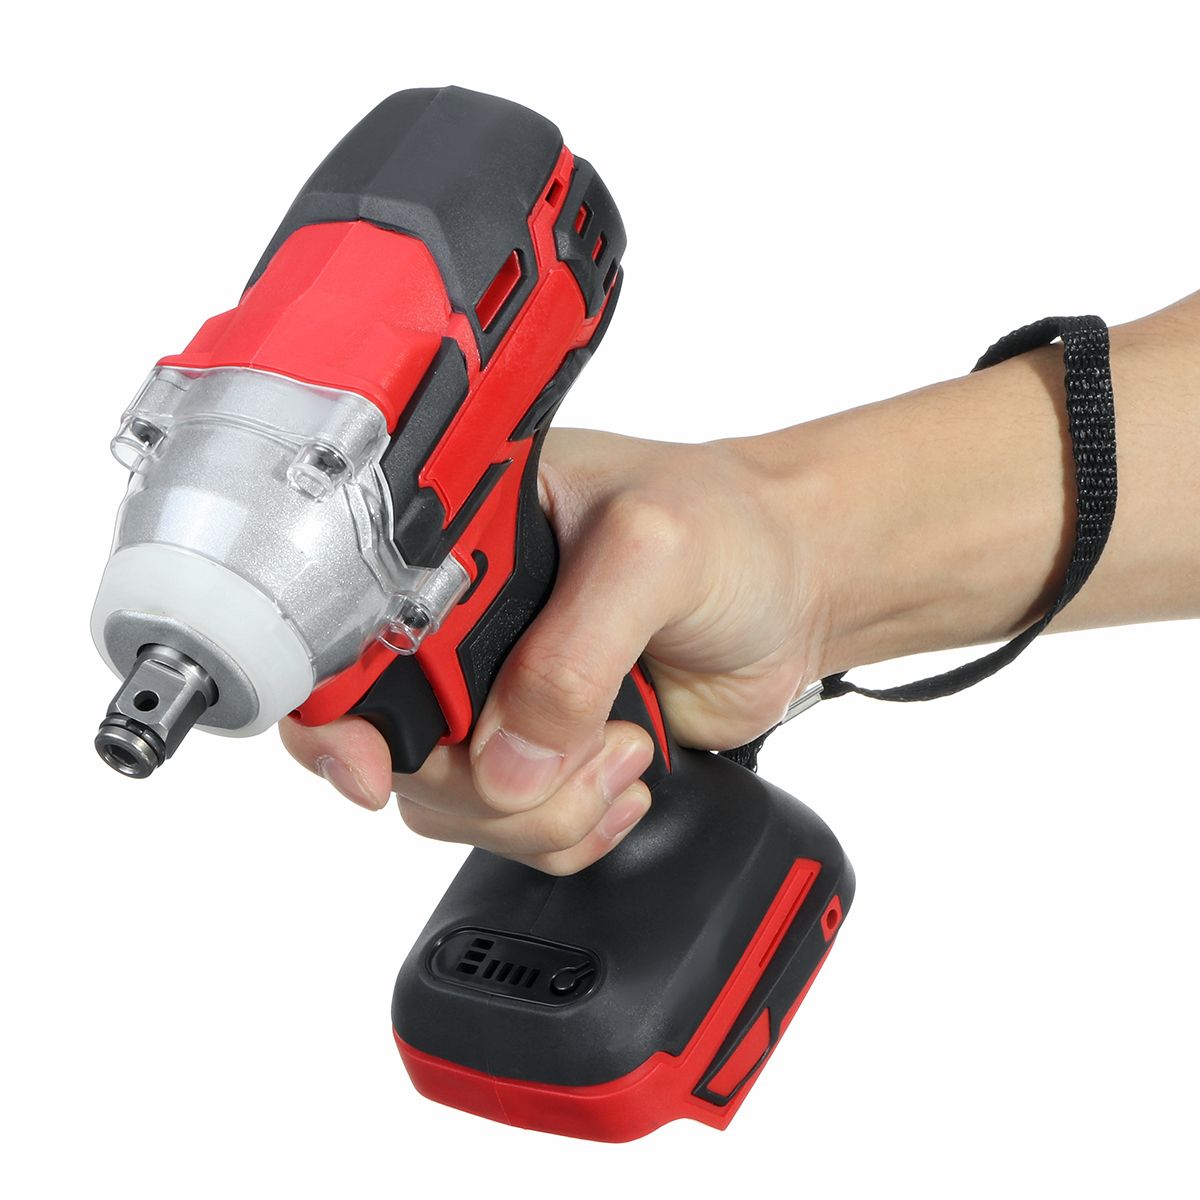 18V-520Nm-Cordless-Impact-Drill-Brushless-Li-ion-Electric-Drill-Tool-For-Makita-Battery-Stepless-Spe-1612126